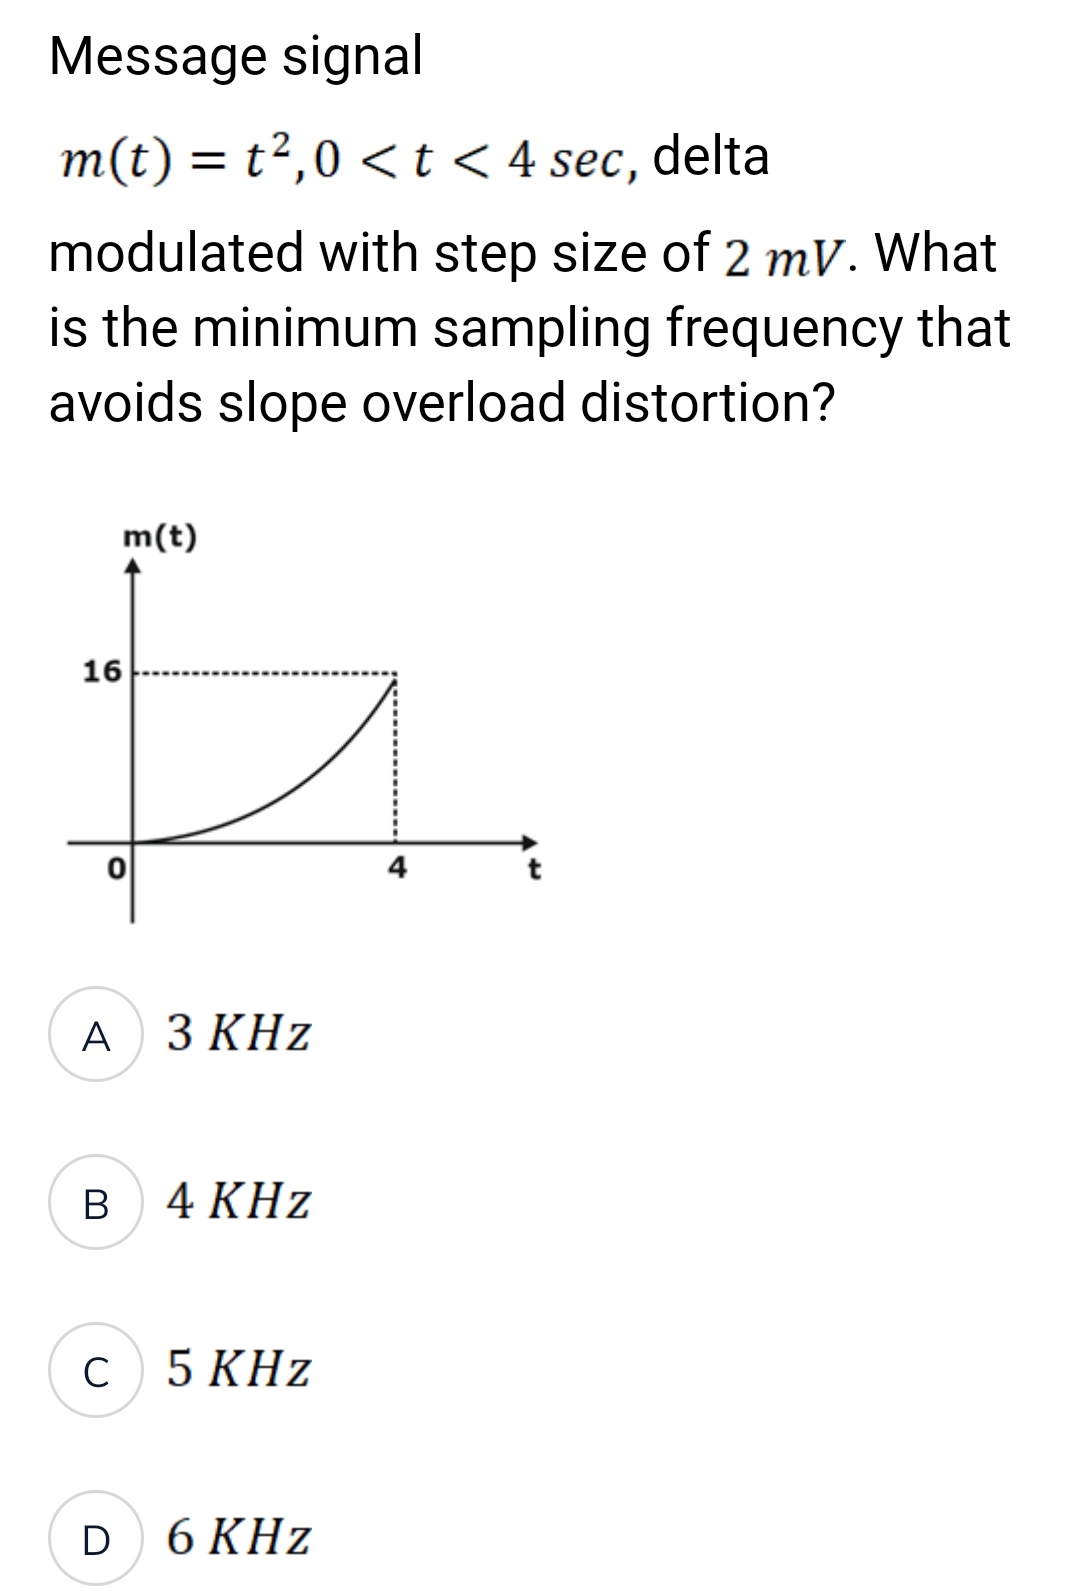 Message signal
m(t) = t²,0 < t < 4 sec, delta
modulated with step size of 2 mV. What
is the minimum sampling frequency that
avoids slope overload distortion?
16
O
A 3 KHz
B
m(t)
с
D
4 KHz
5 KHz
6 KHz
4